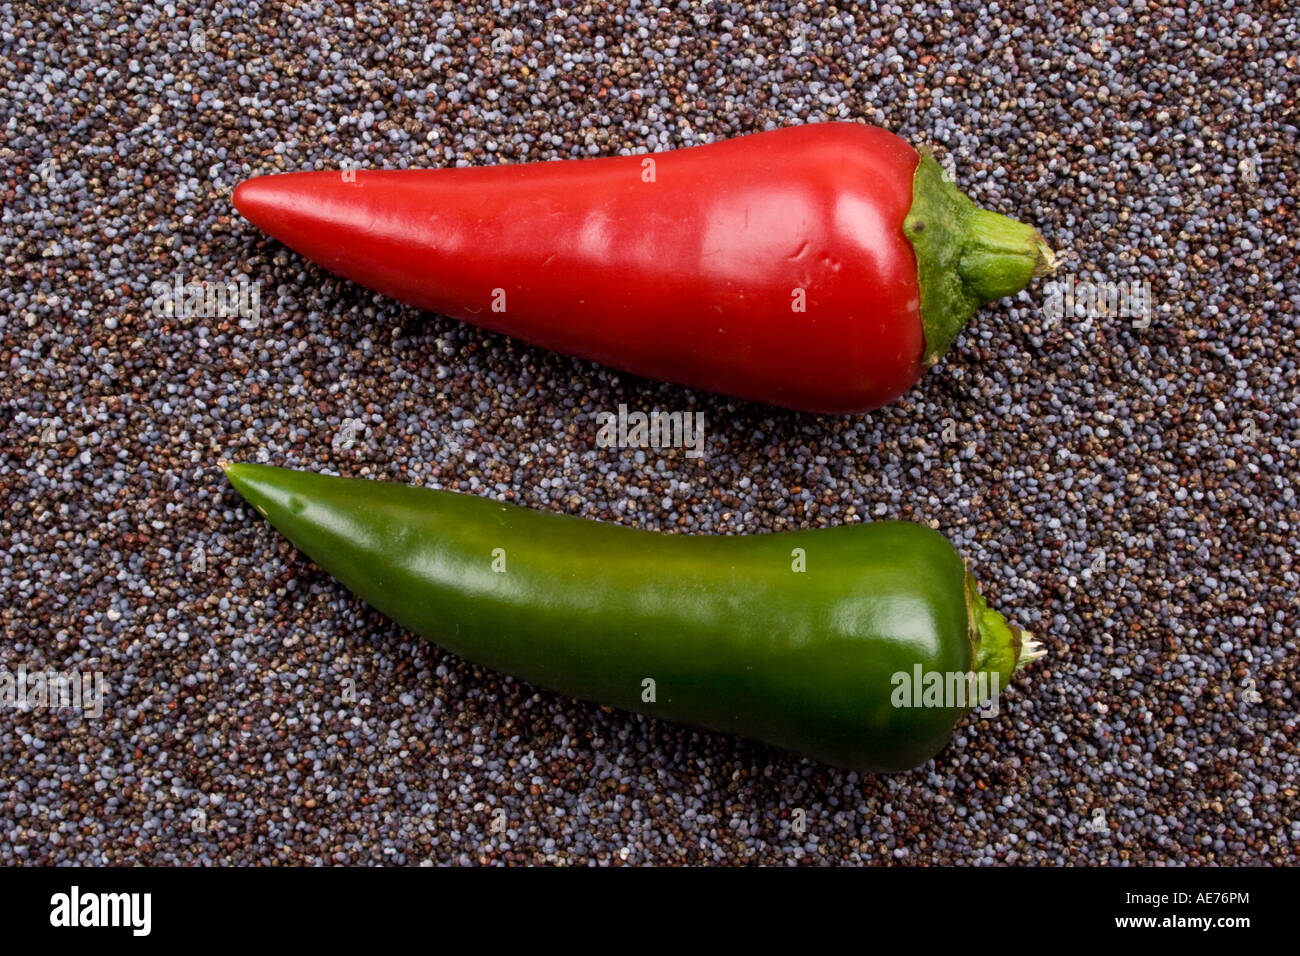 Two red and green chili peppers on blue poppy seeds Stock Photo